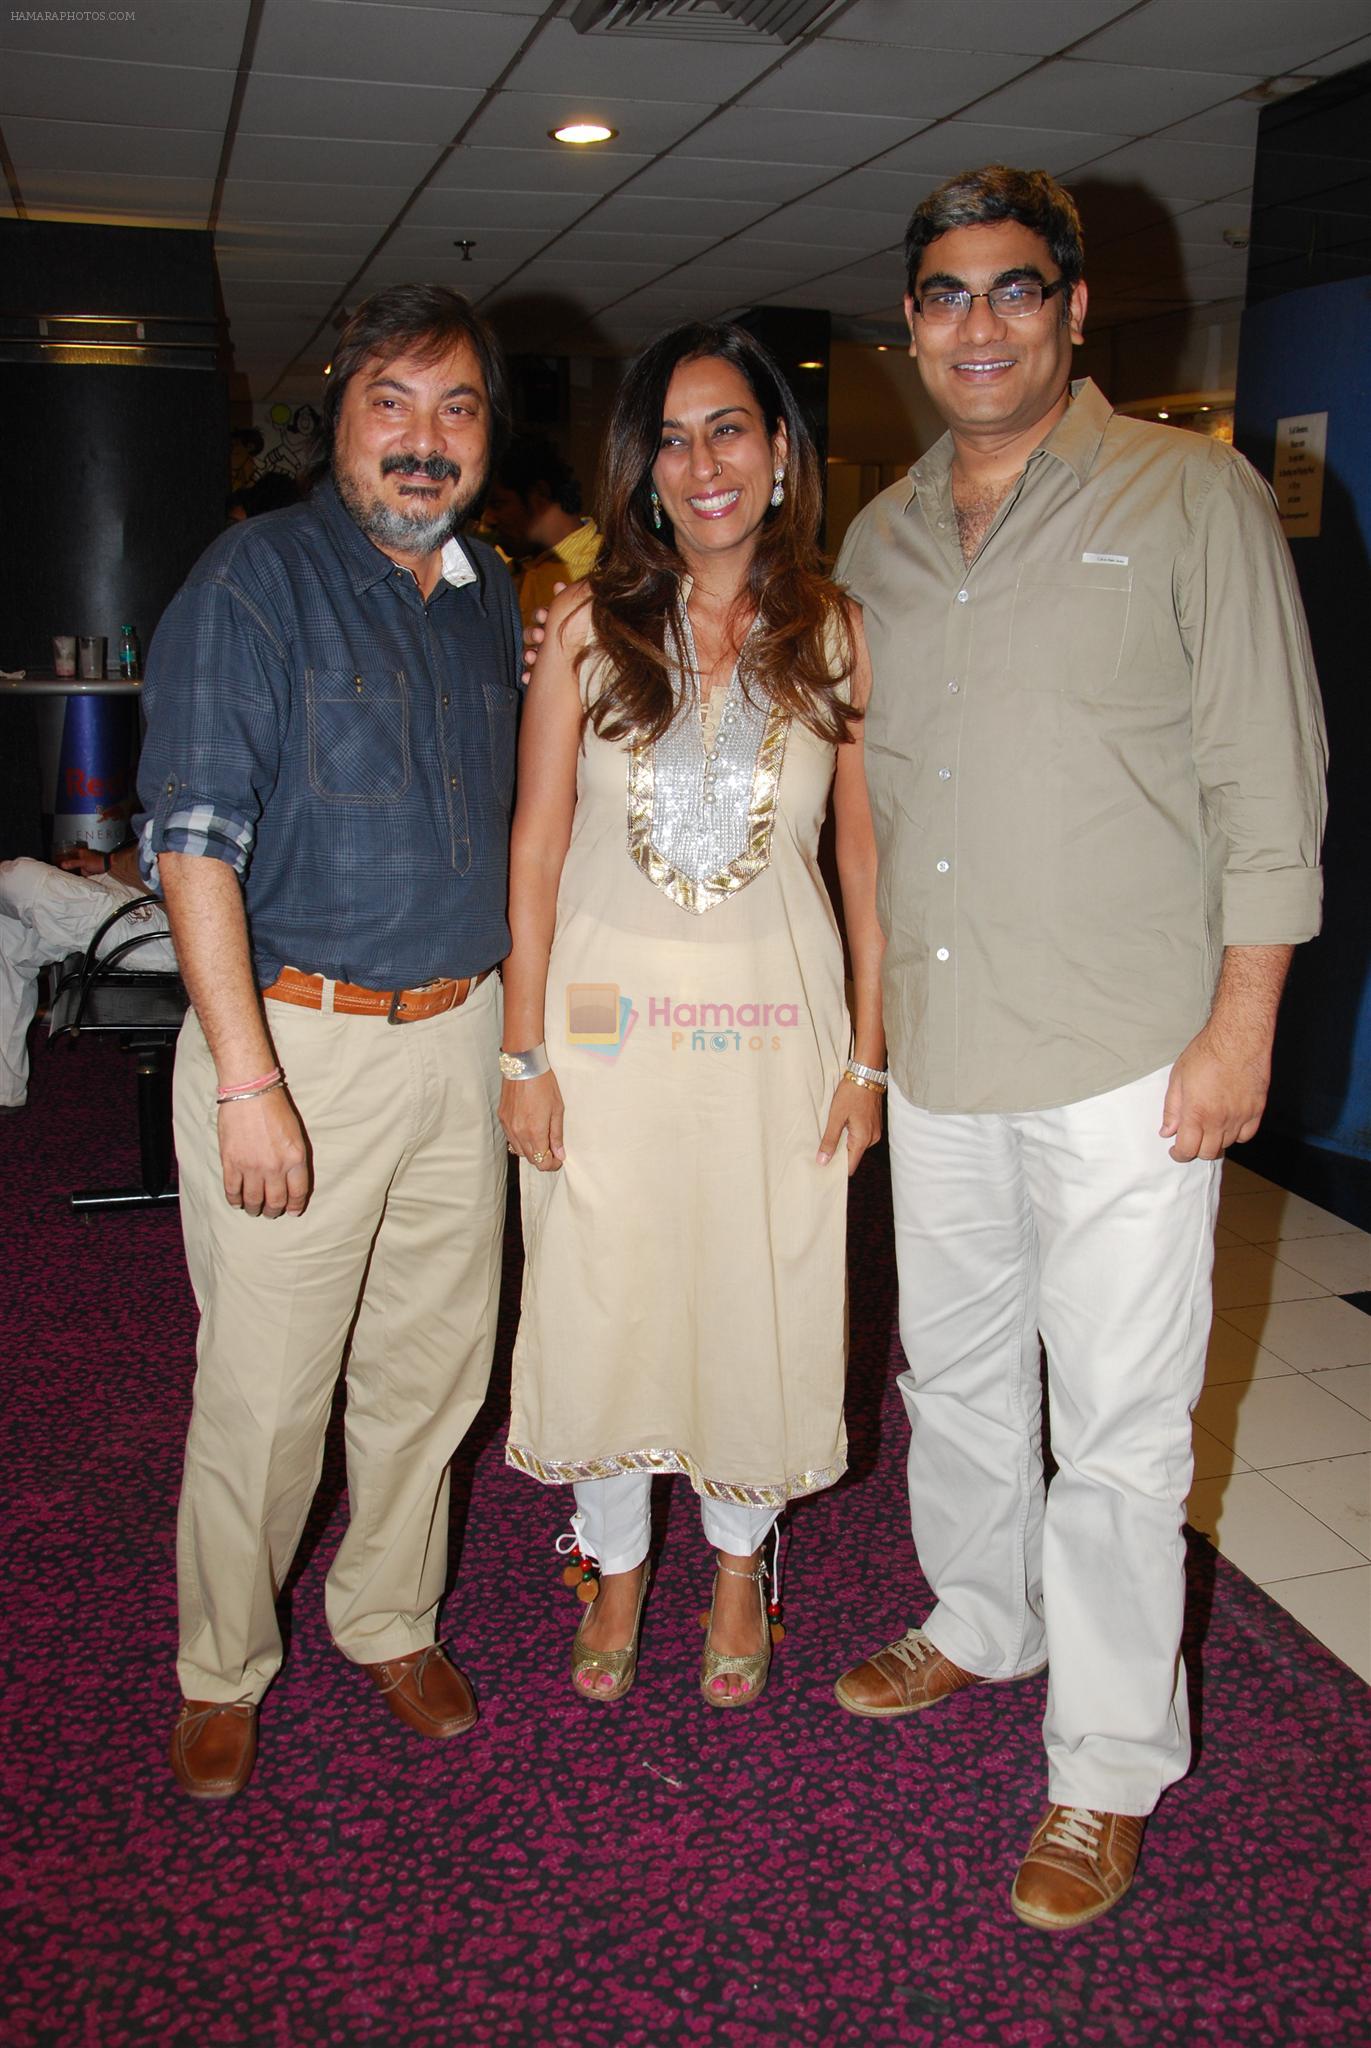 Tony Singh at the Celebration of the Completion Party of 100 Episodes of PARVARISH kuch khatti kuch meethi in bowling alley on 7th April 2012